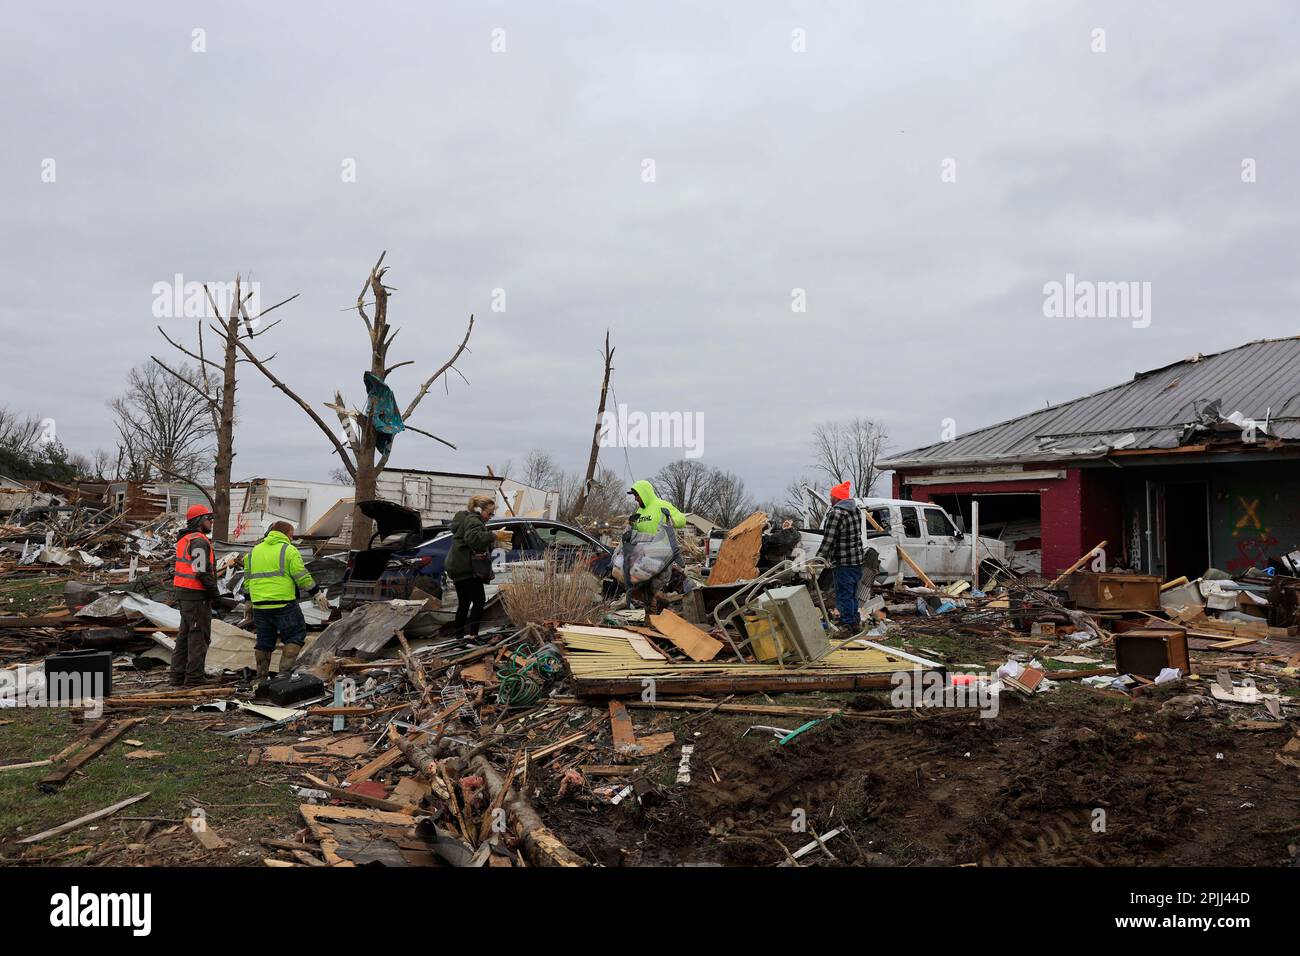 SULLIVAN, INDIANA - APRIL 1: Volunteers help remove items from a damaged home for a family with a baby after a tornado on April 1, 2023 in Sullivan, Indiana. Three people were declared dead, and 8 others were injured, as the search and rescue operation continued Saturday afternoon. The severe storm that created the tornado struck Friday, March 31, 2023 and damaged about 150 homes and structures in Sullivan. (Photo by Jeremy Hogan/The Bloomingtonian) Stock Photo